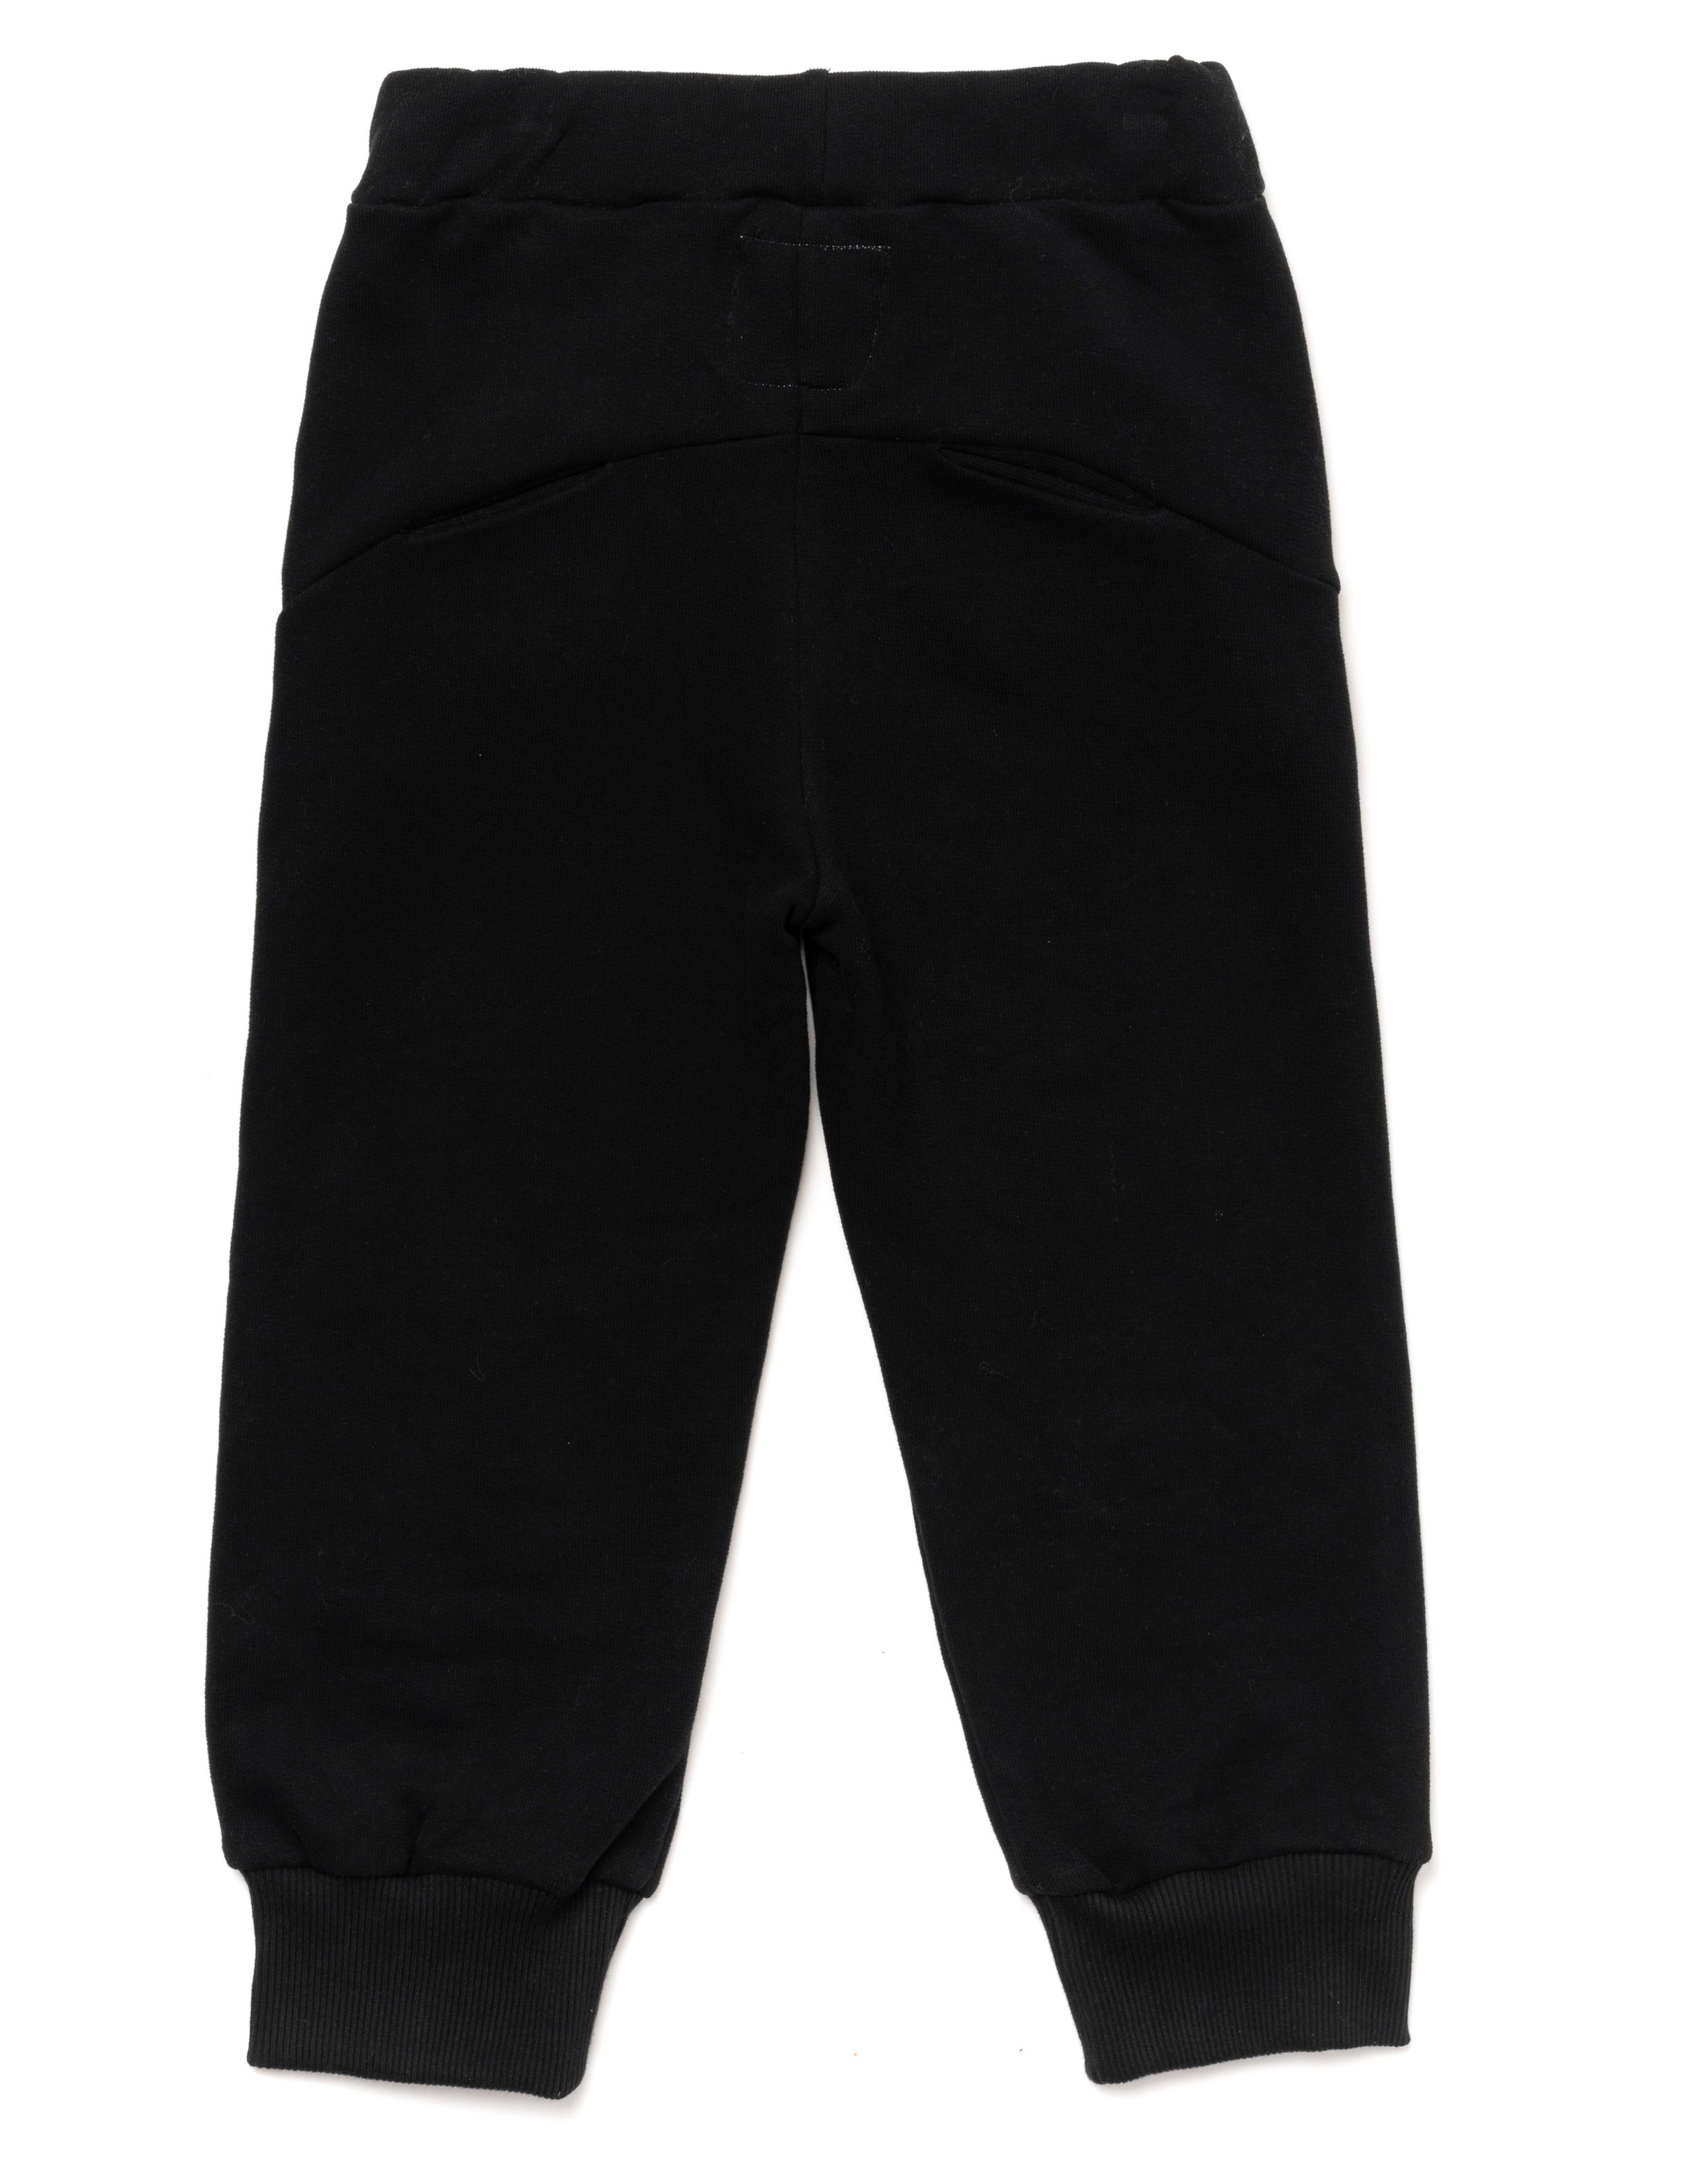                                                                                                                       Terry Joggers Black 